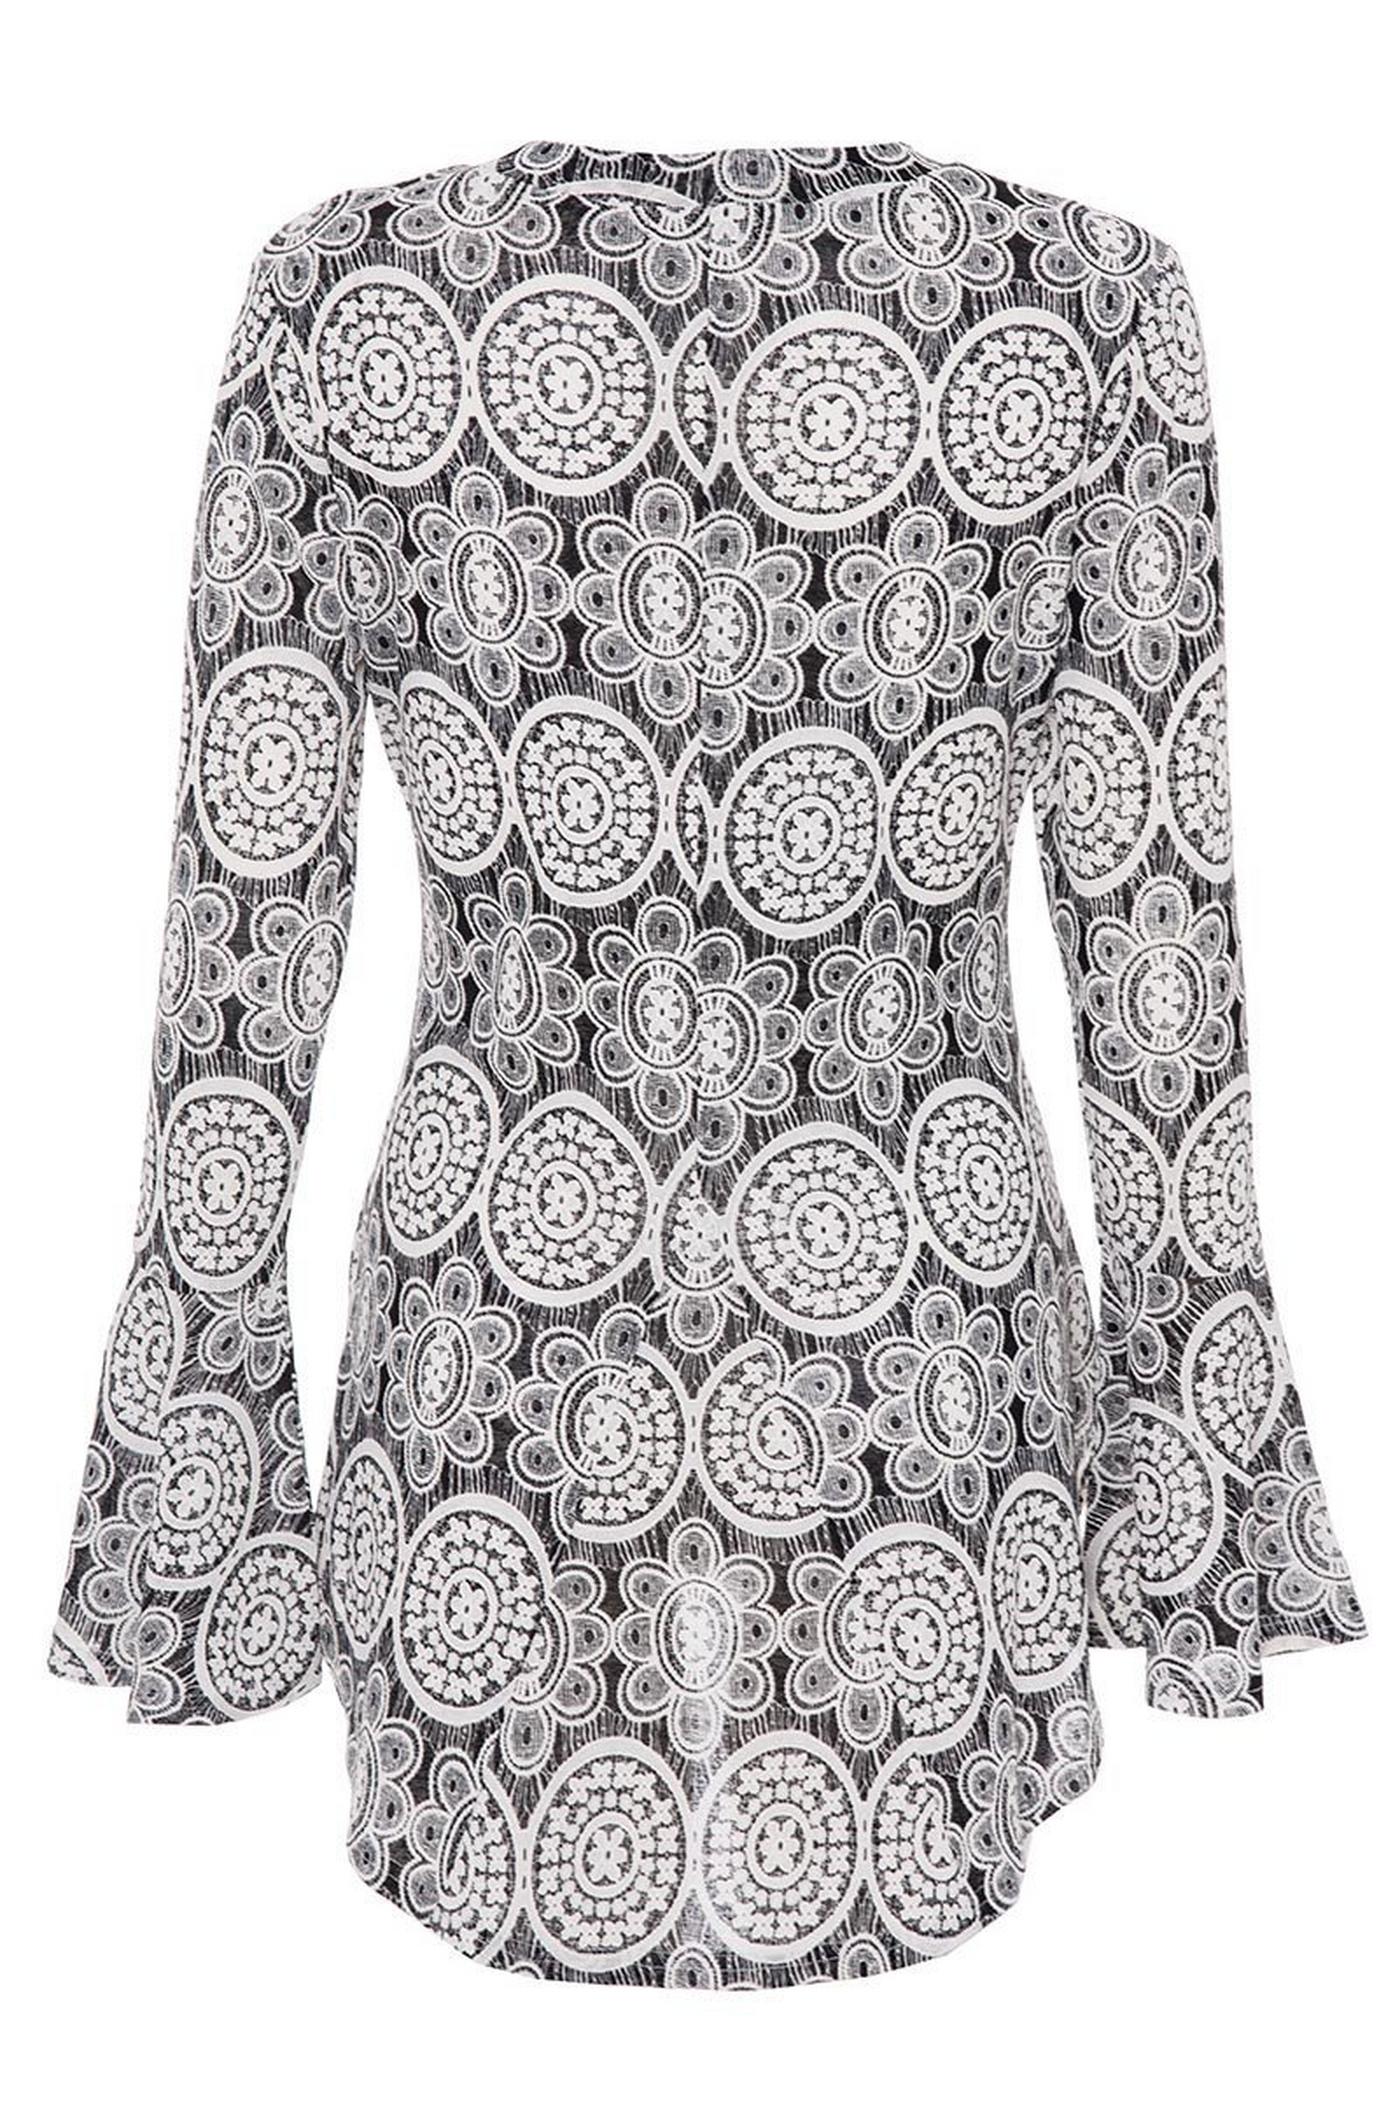 Black And White Lace Print Flute Sleeve Top